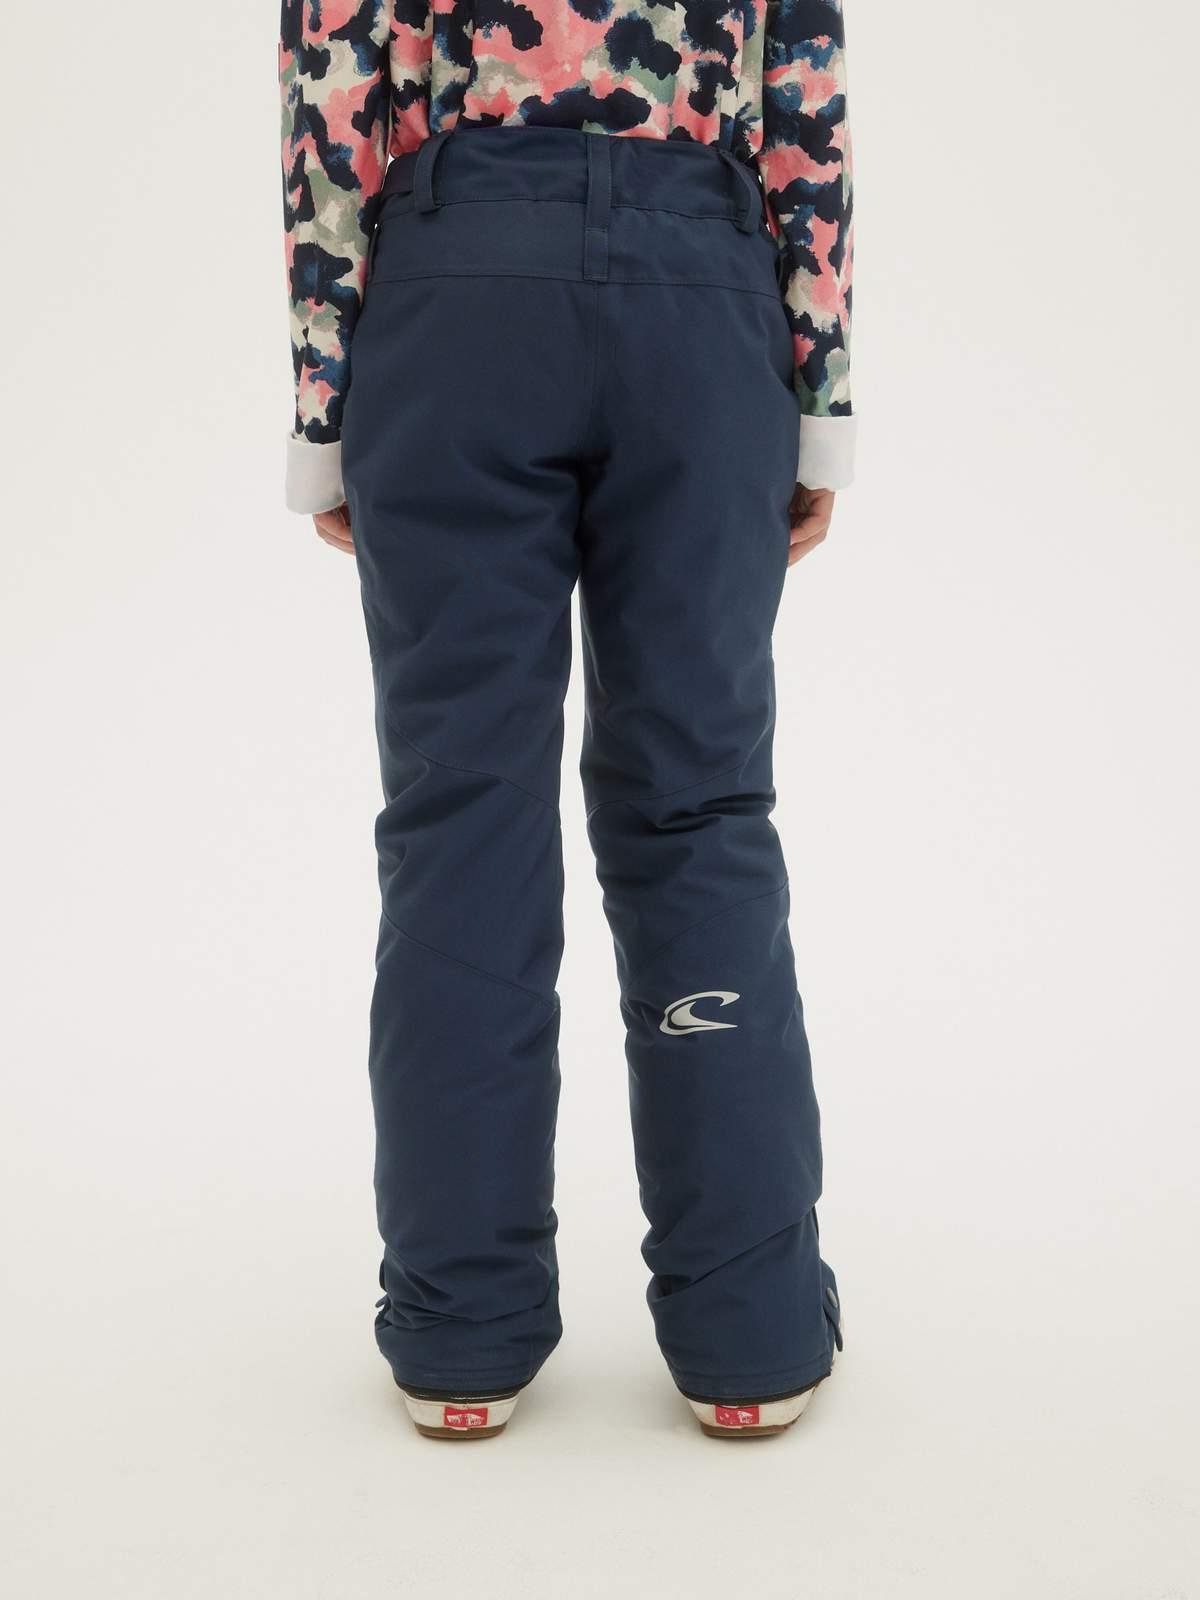 O'Neill Girls Charm Snow Pant -  – Head Shoulders Knees and Toes